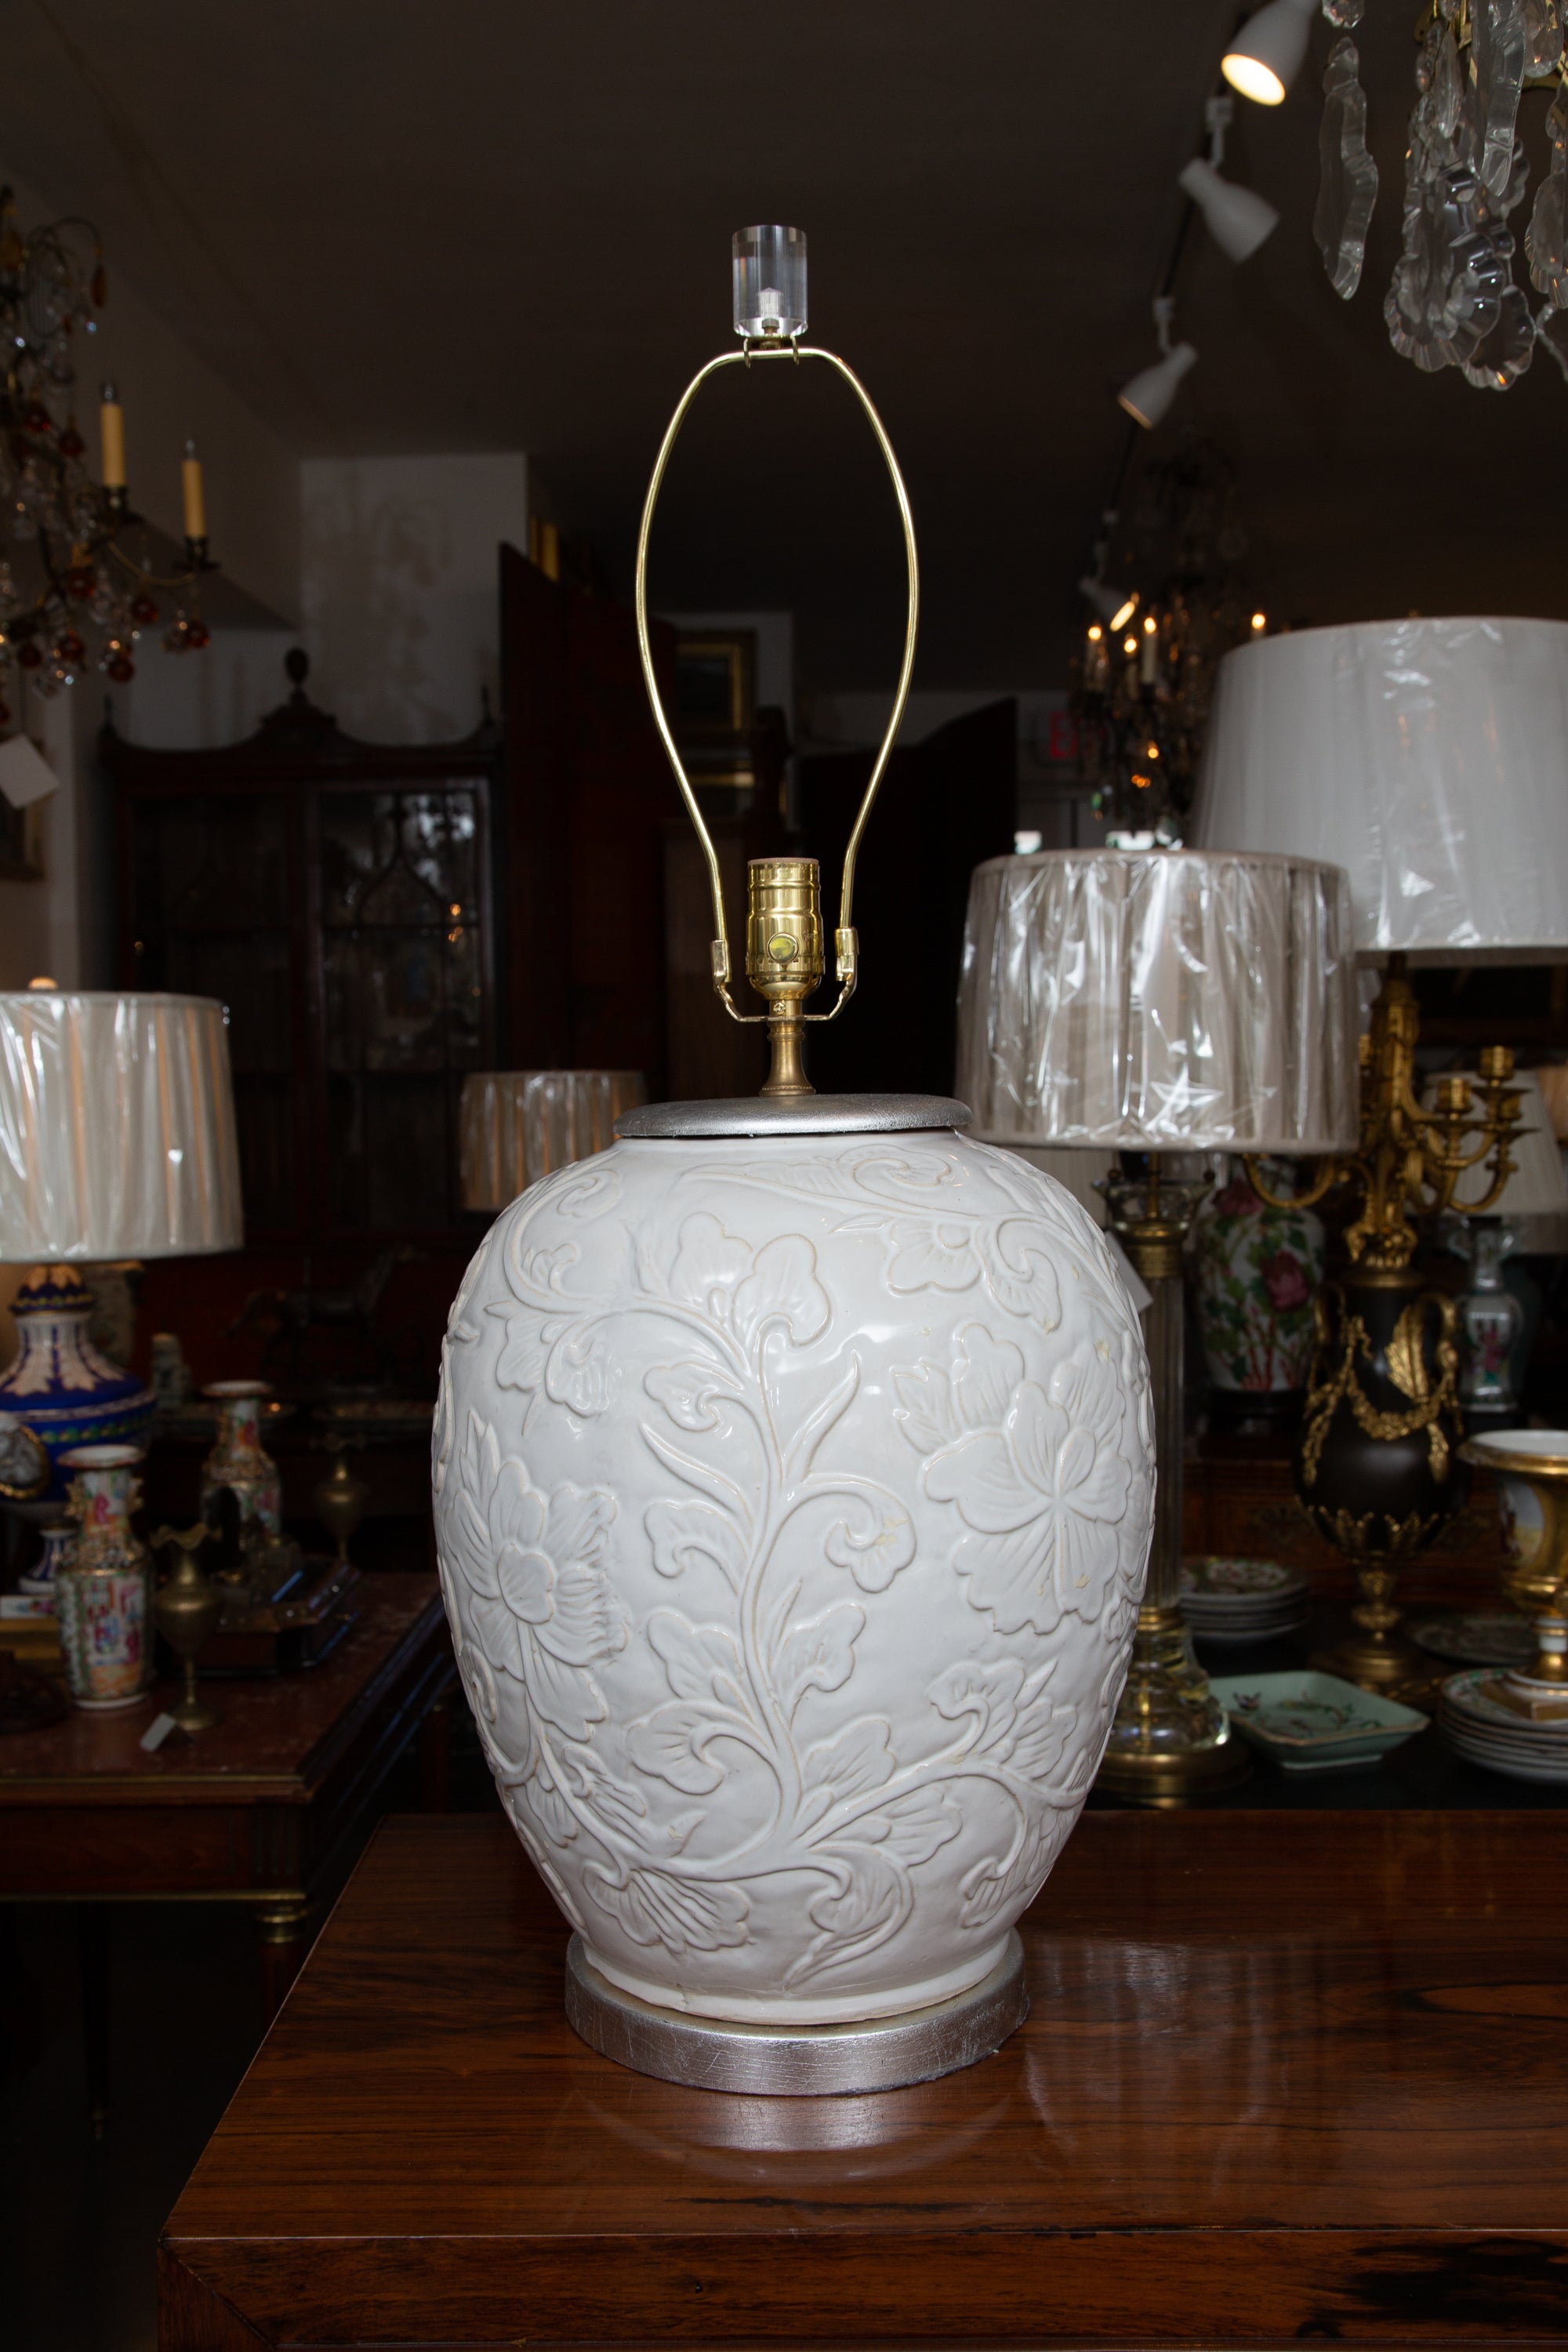 Fine pair of Italian handmade lamps with a raised relief design. Silver accents.